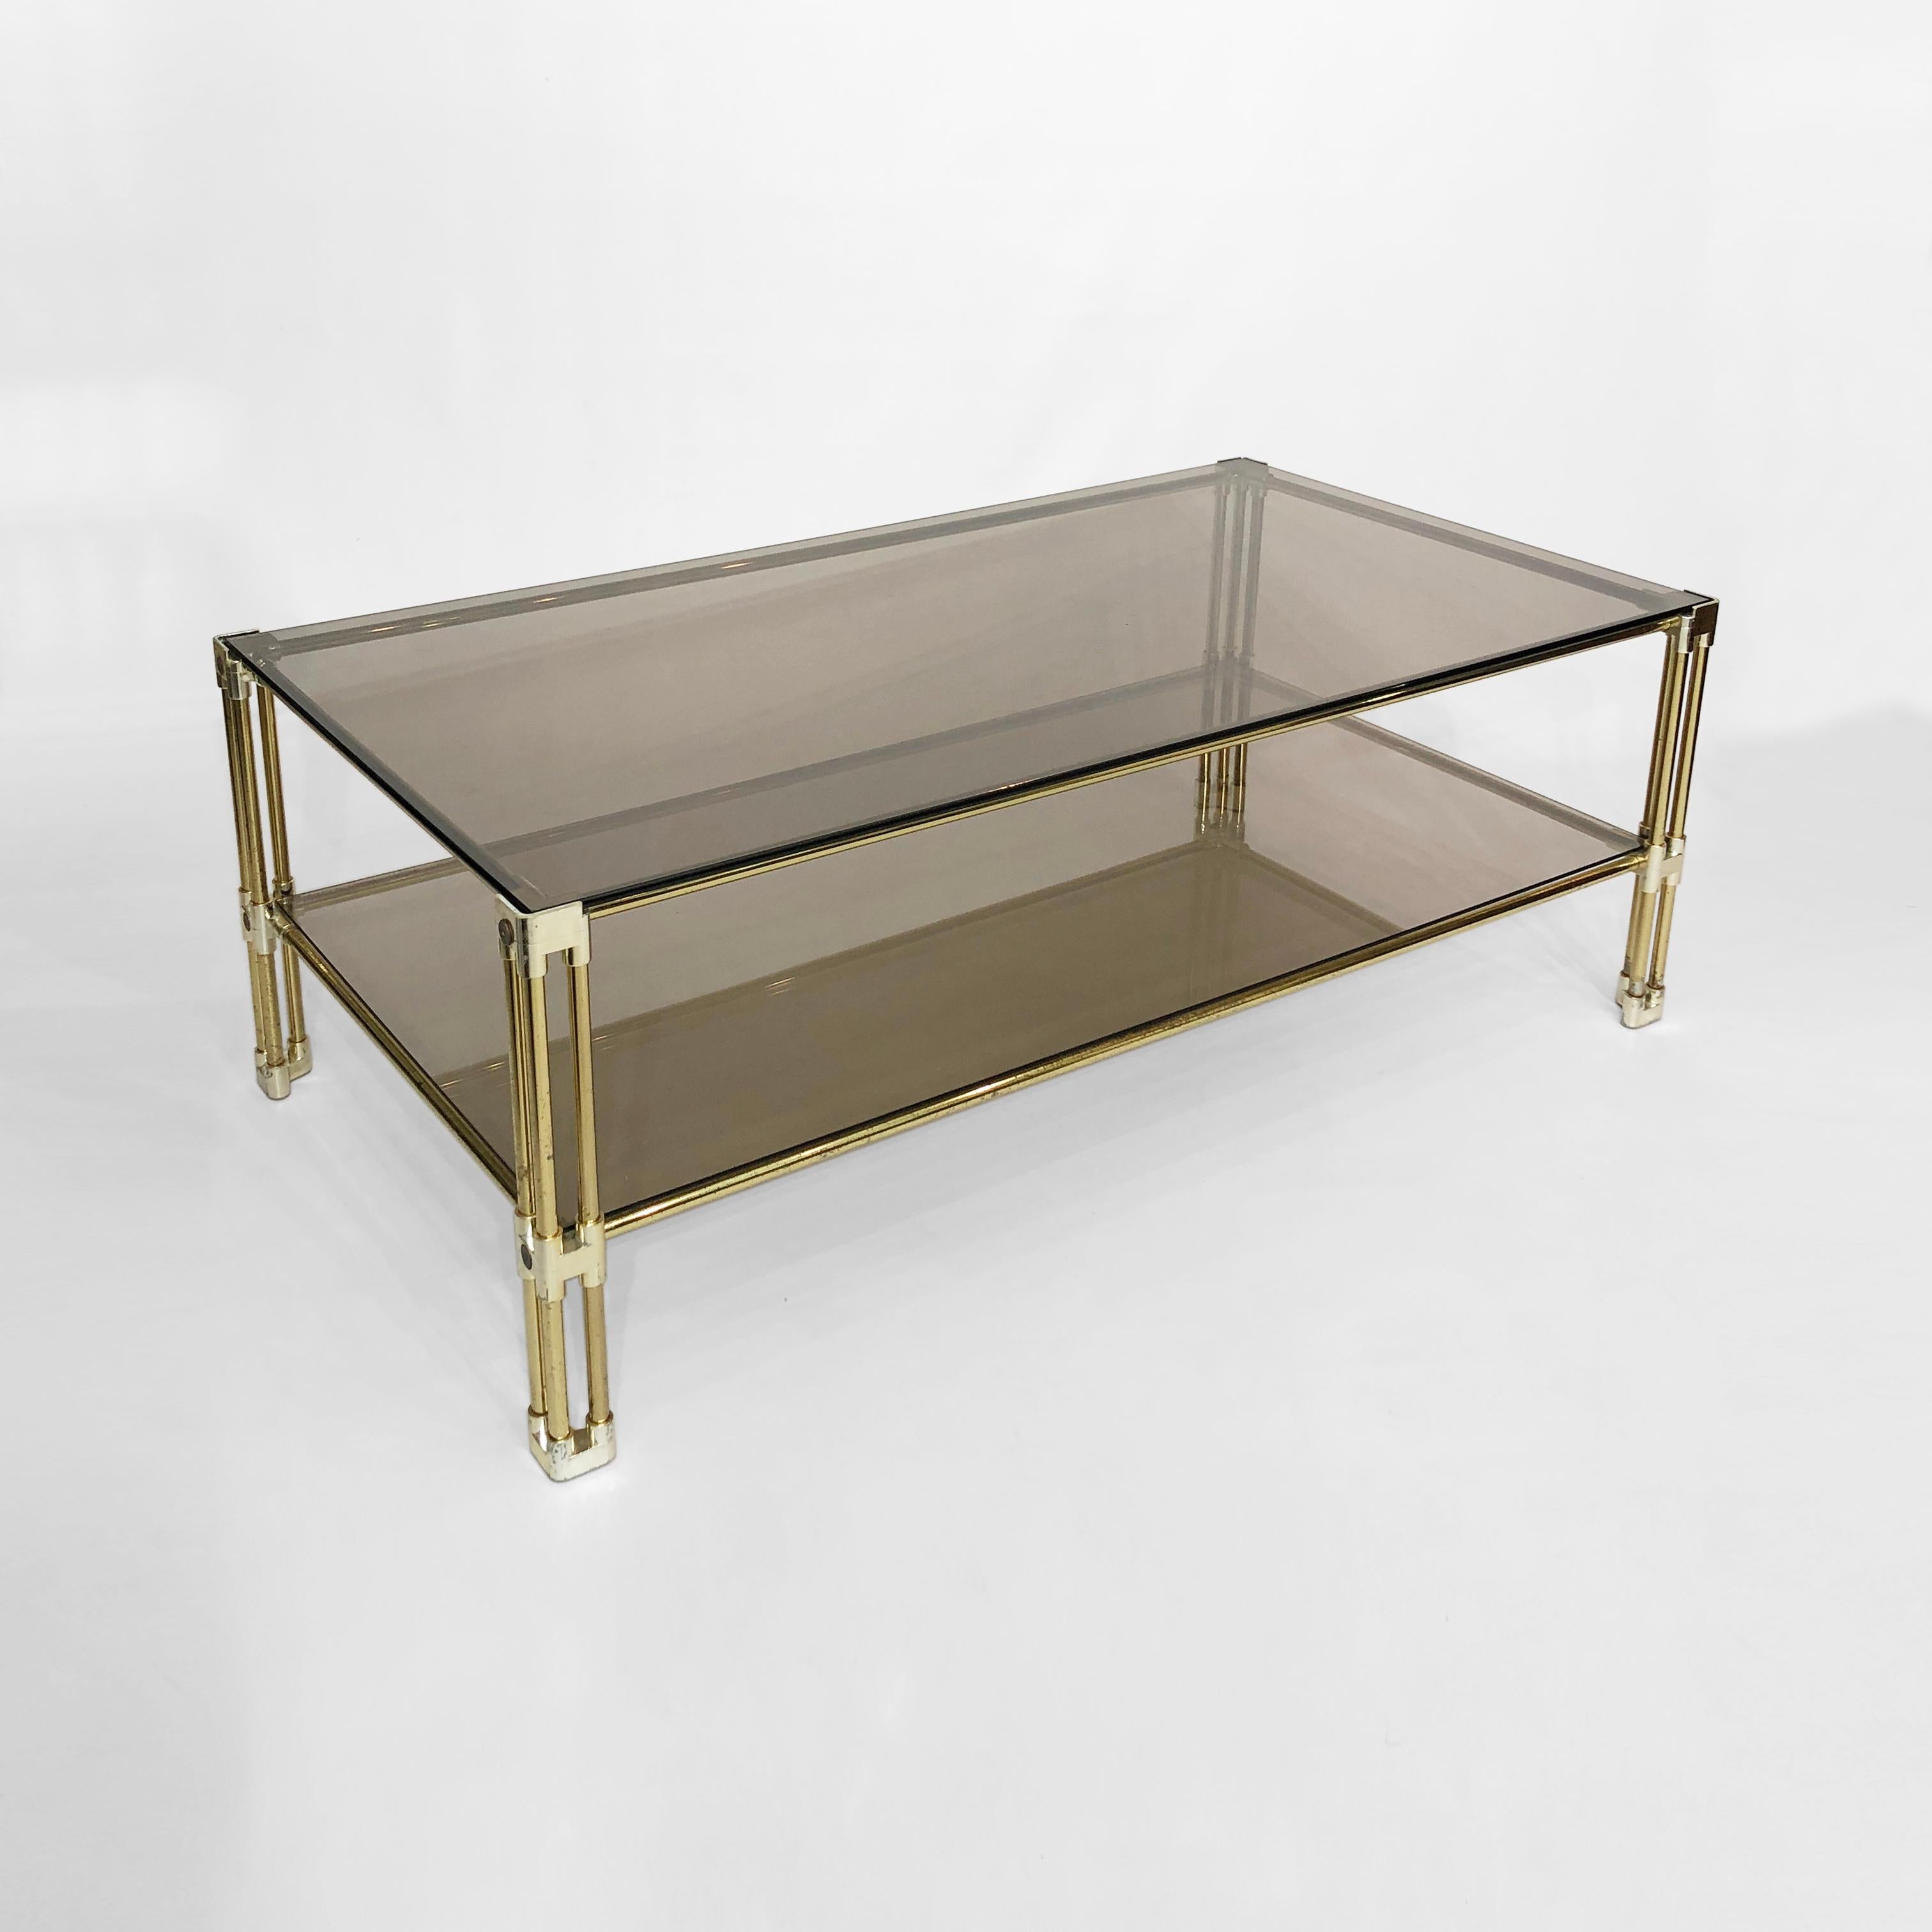 A two-tiered brass and smoked glass coffee table, believed to have originated in 1970s Italy. This prime example of Hollywood Regency design features two sheets of tempered smoked glass, housed in a brass frame. The corners and joints of the frame